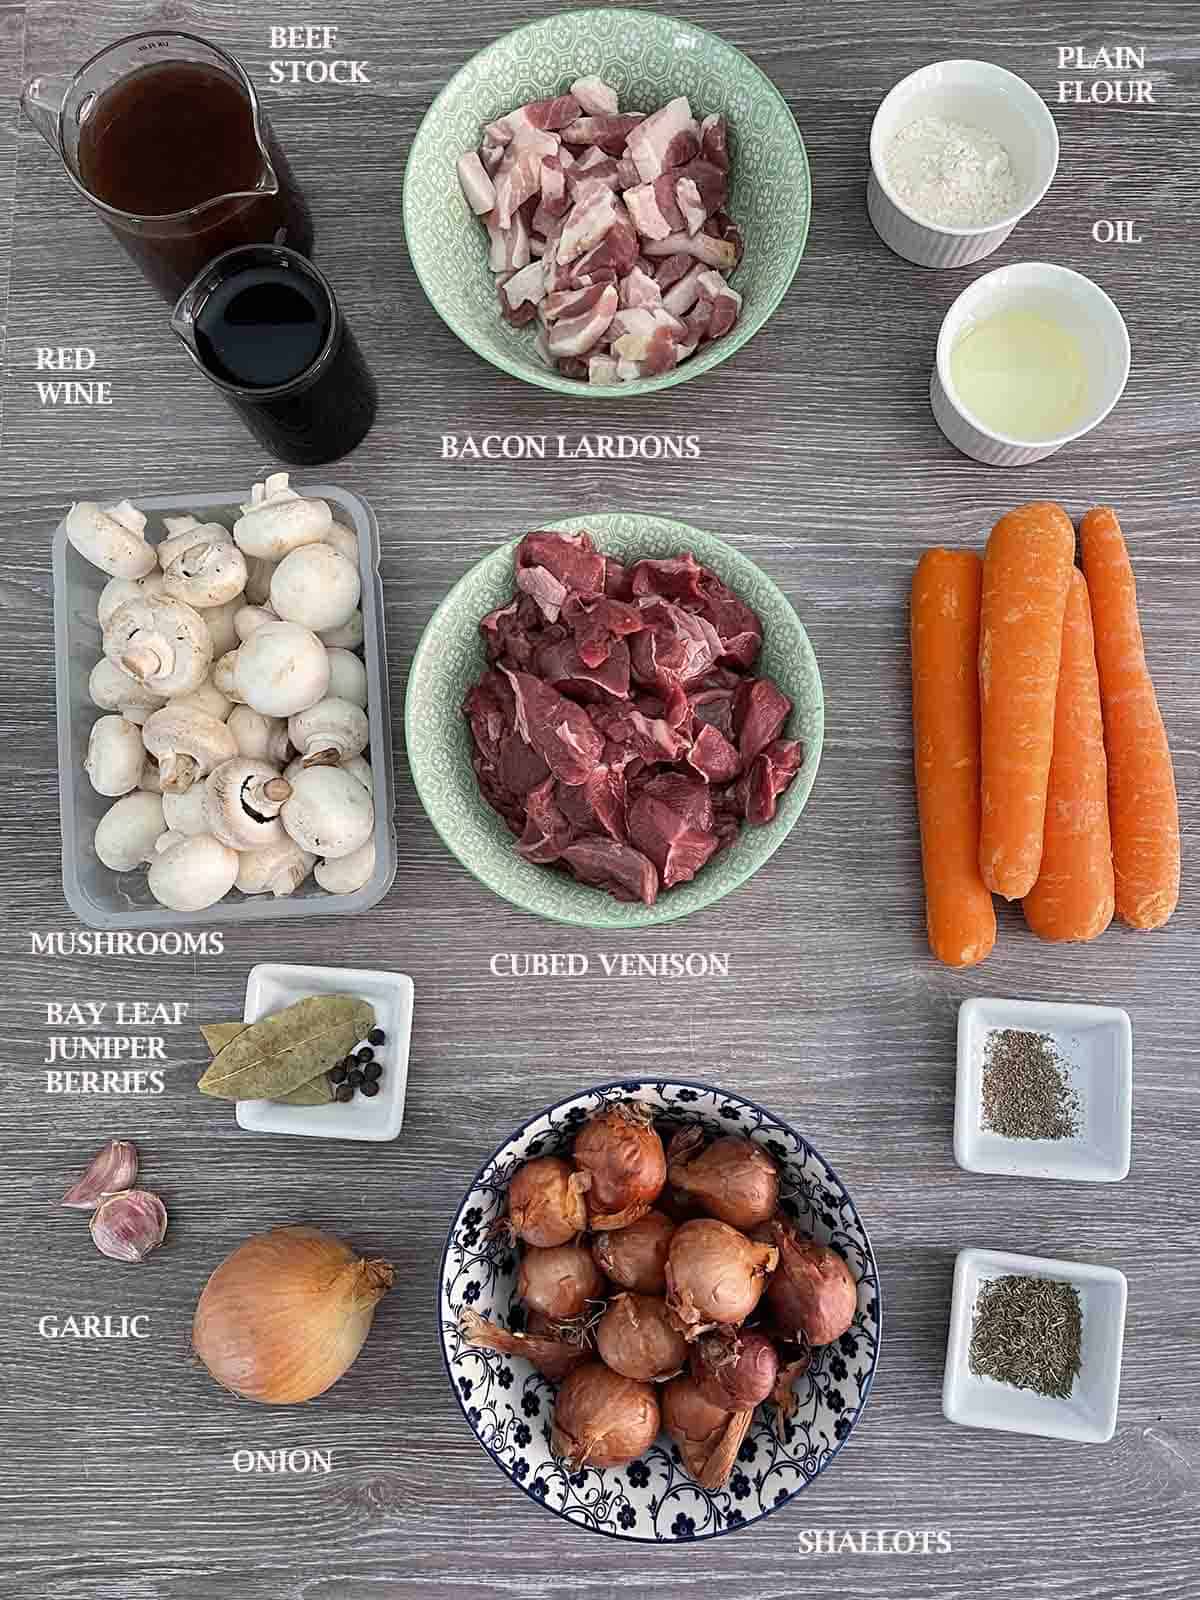 ingredients including venison, carrots, bacon and shallots.